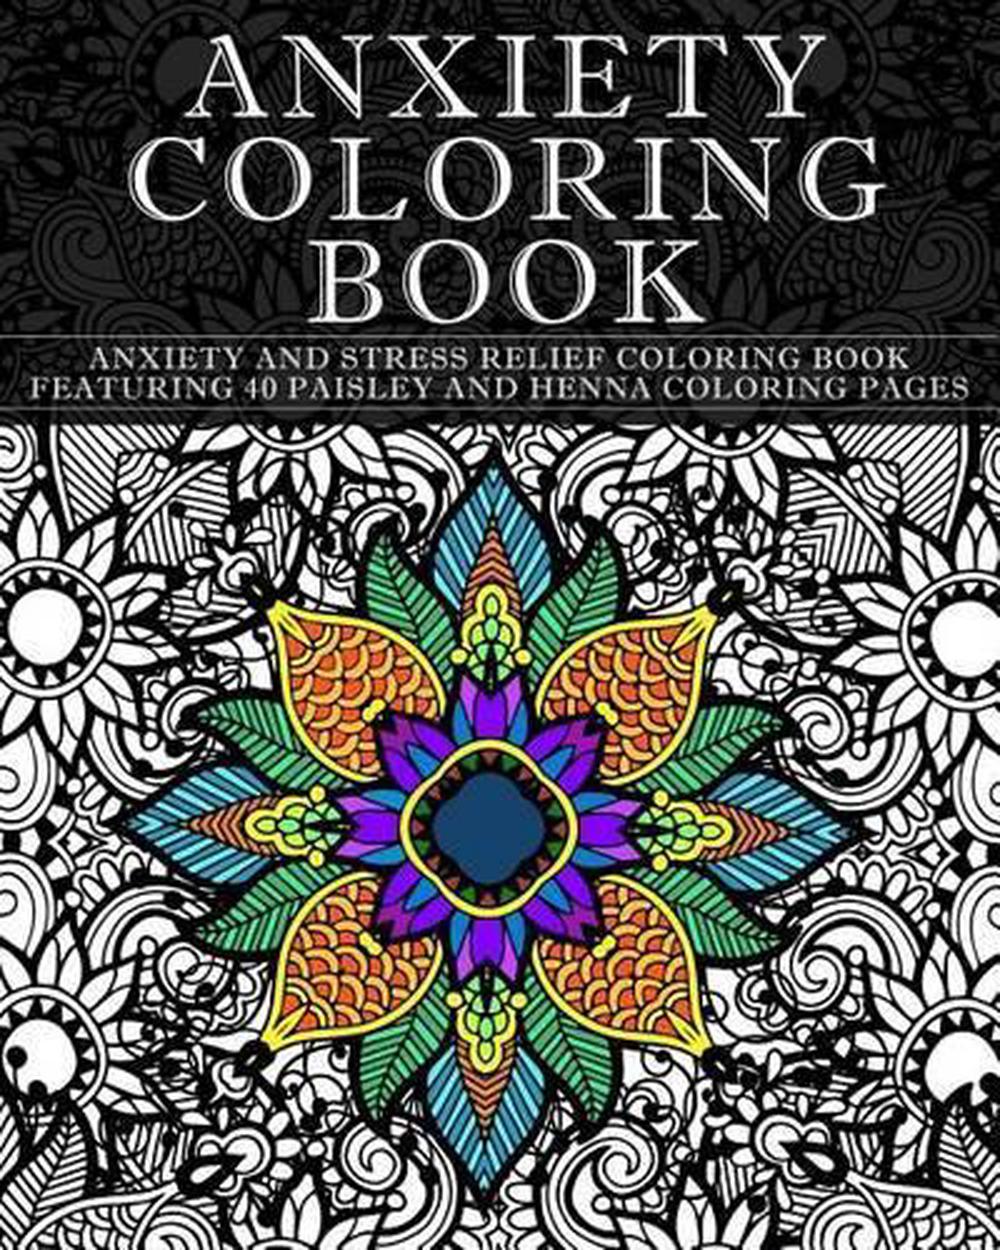 98 List Are Colouring Books Good For Anxiety 